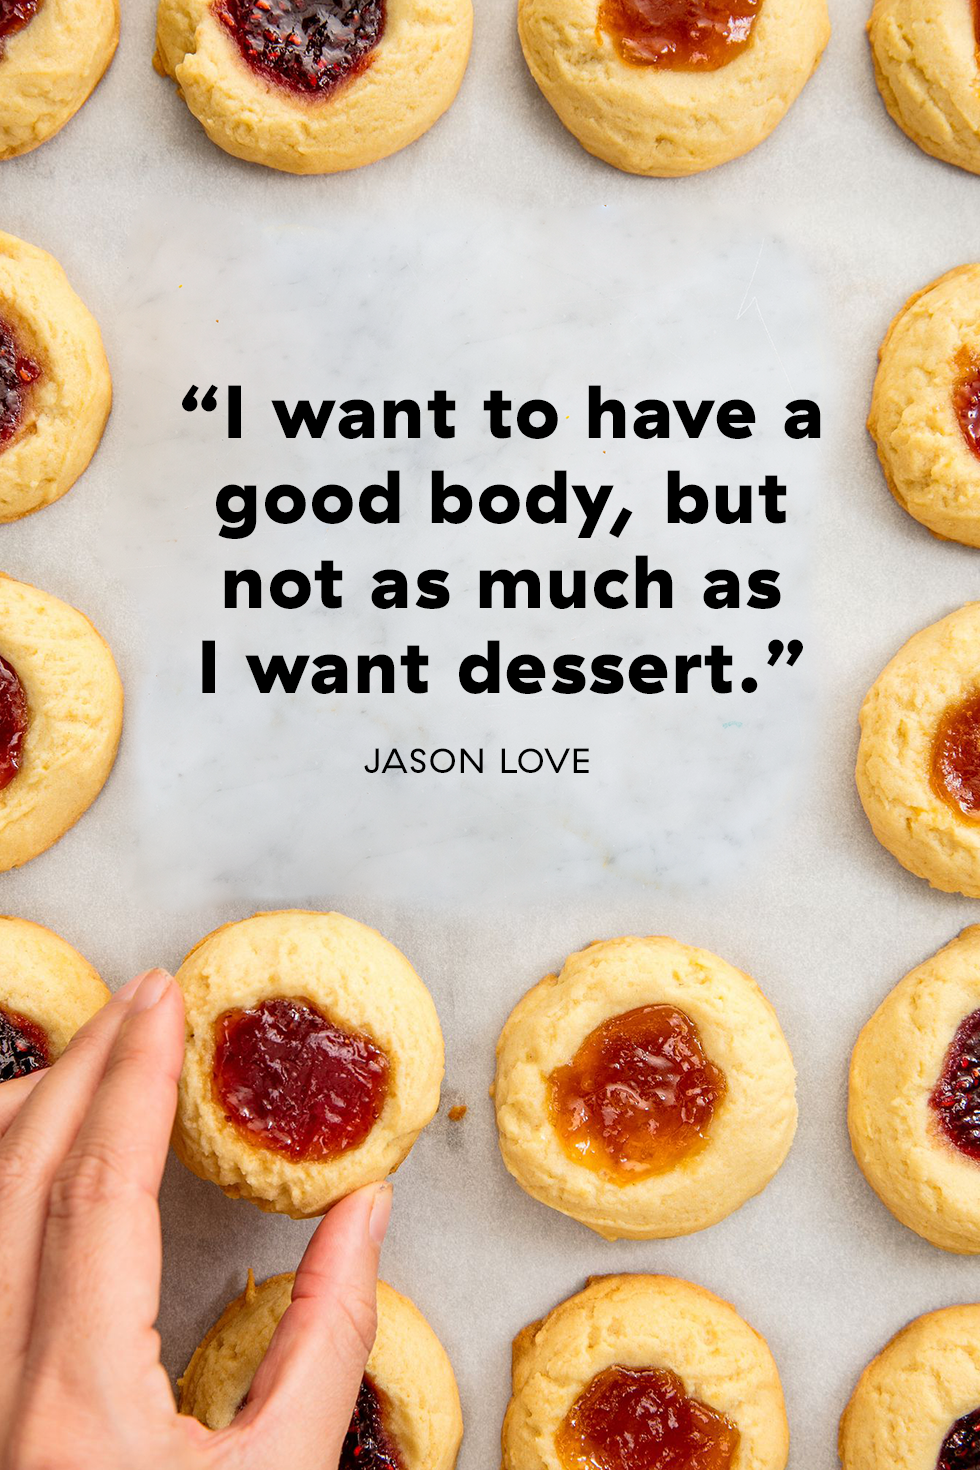 The All-Time Greatest Quotes About Dessert - Dessert Quotes